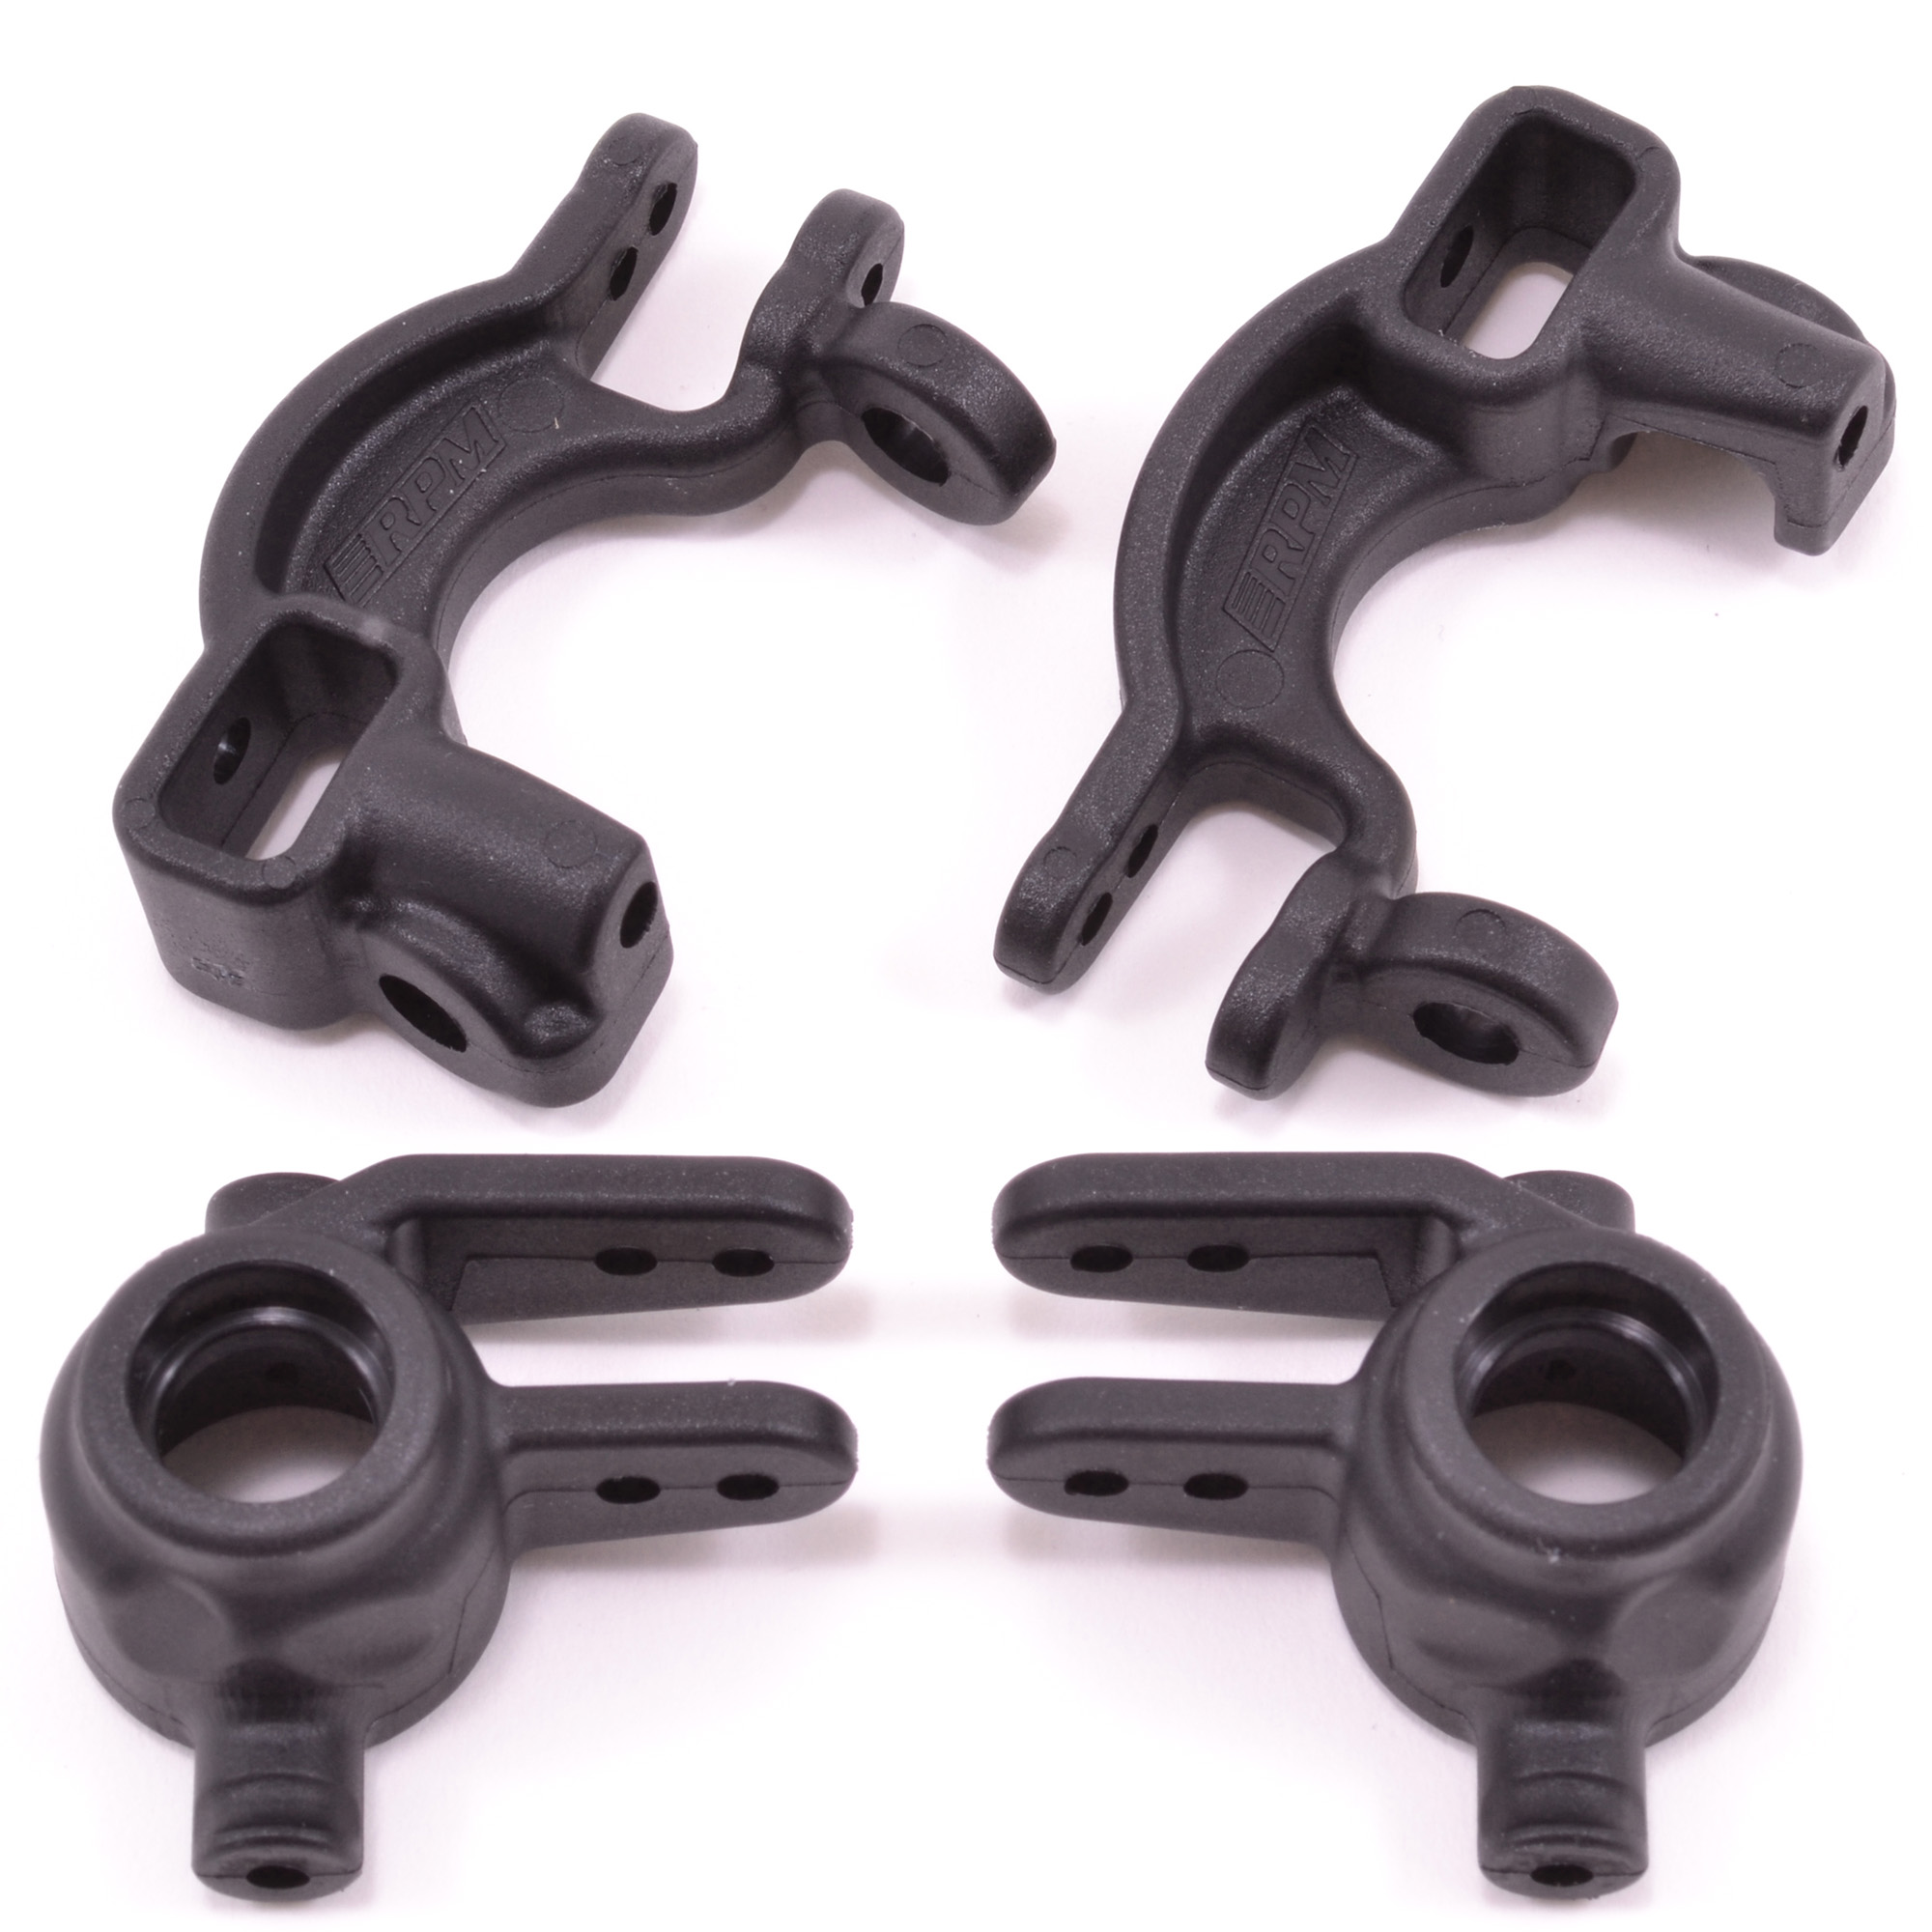 RPM RC Products: Caster Blocks & Spindle Blocks for the Slash 4×4, Rustler 4×4, Stampede 4×4, Hoss 4×4, Rally & Telluride